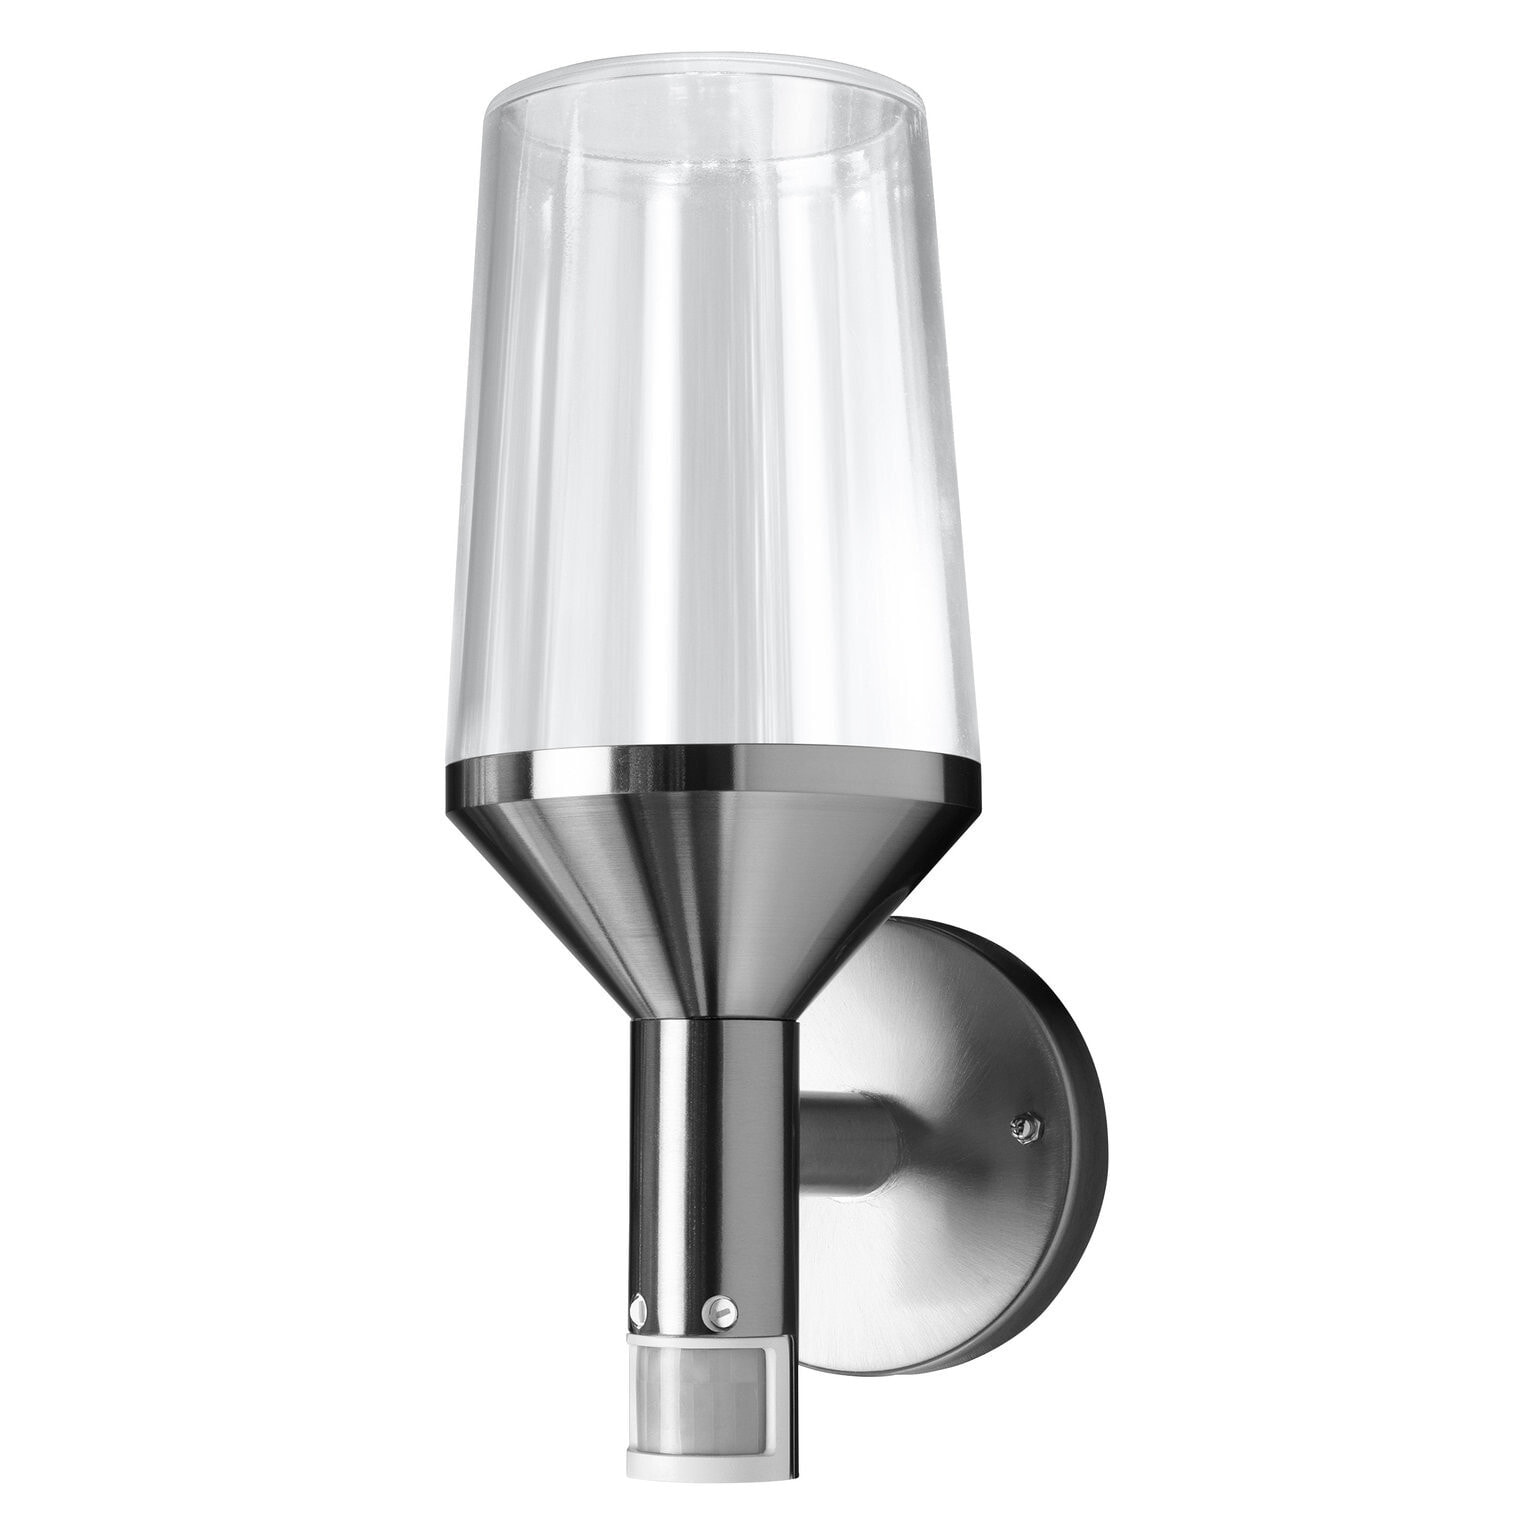 ENDURA CLASSIC CALICE - Outdoor wall lighting - Steel - Glass - Stainless steel - IP44 - Entrance - Facade - Pathway - Patio - I